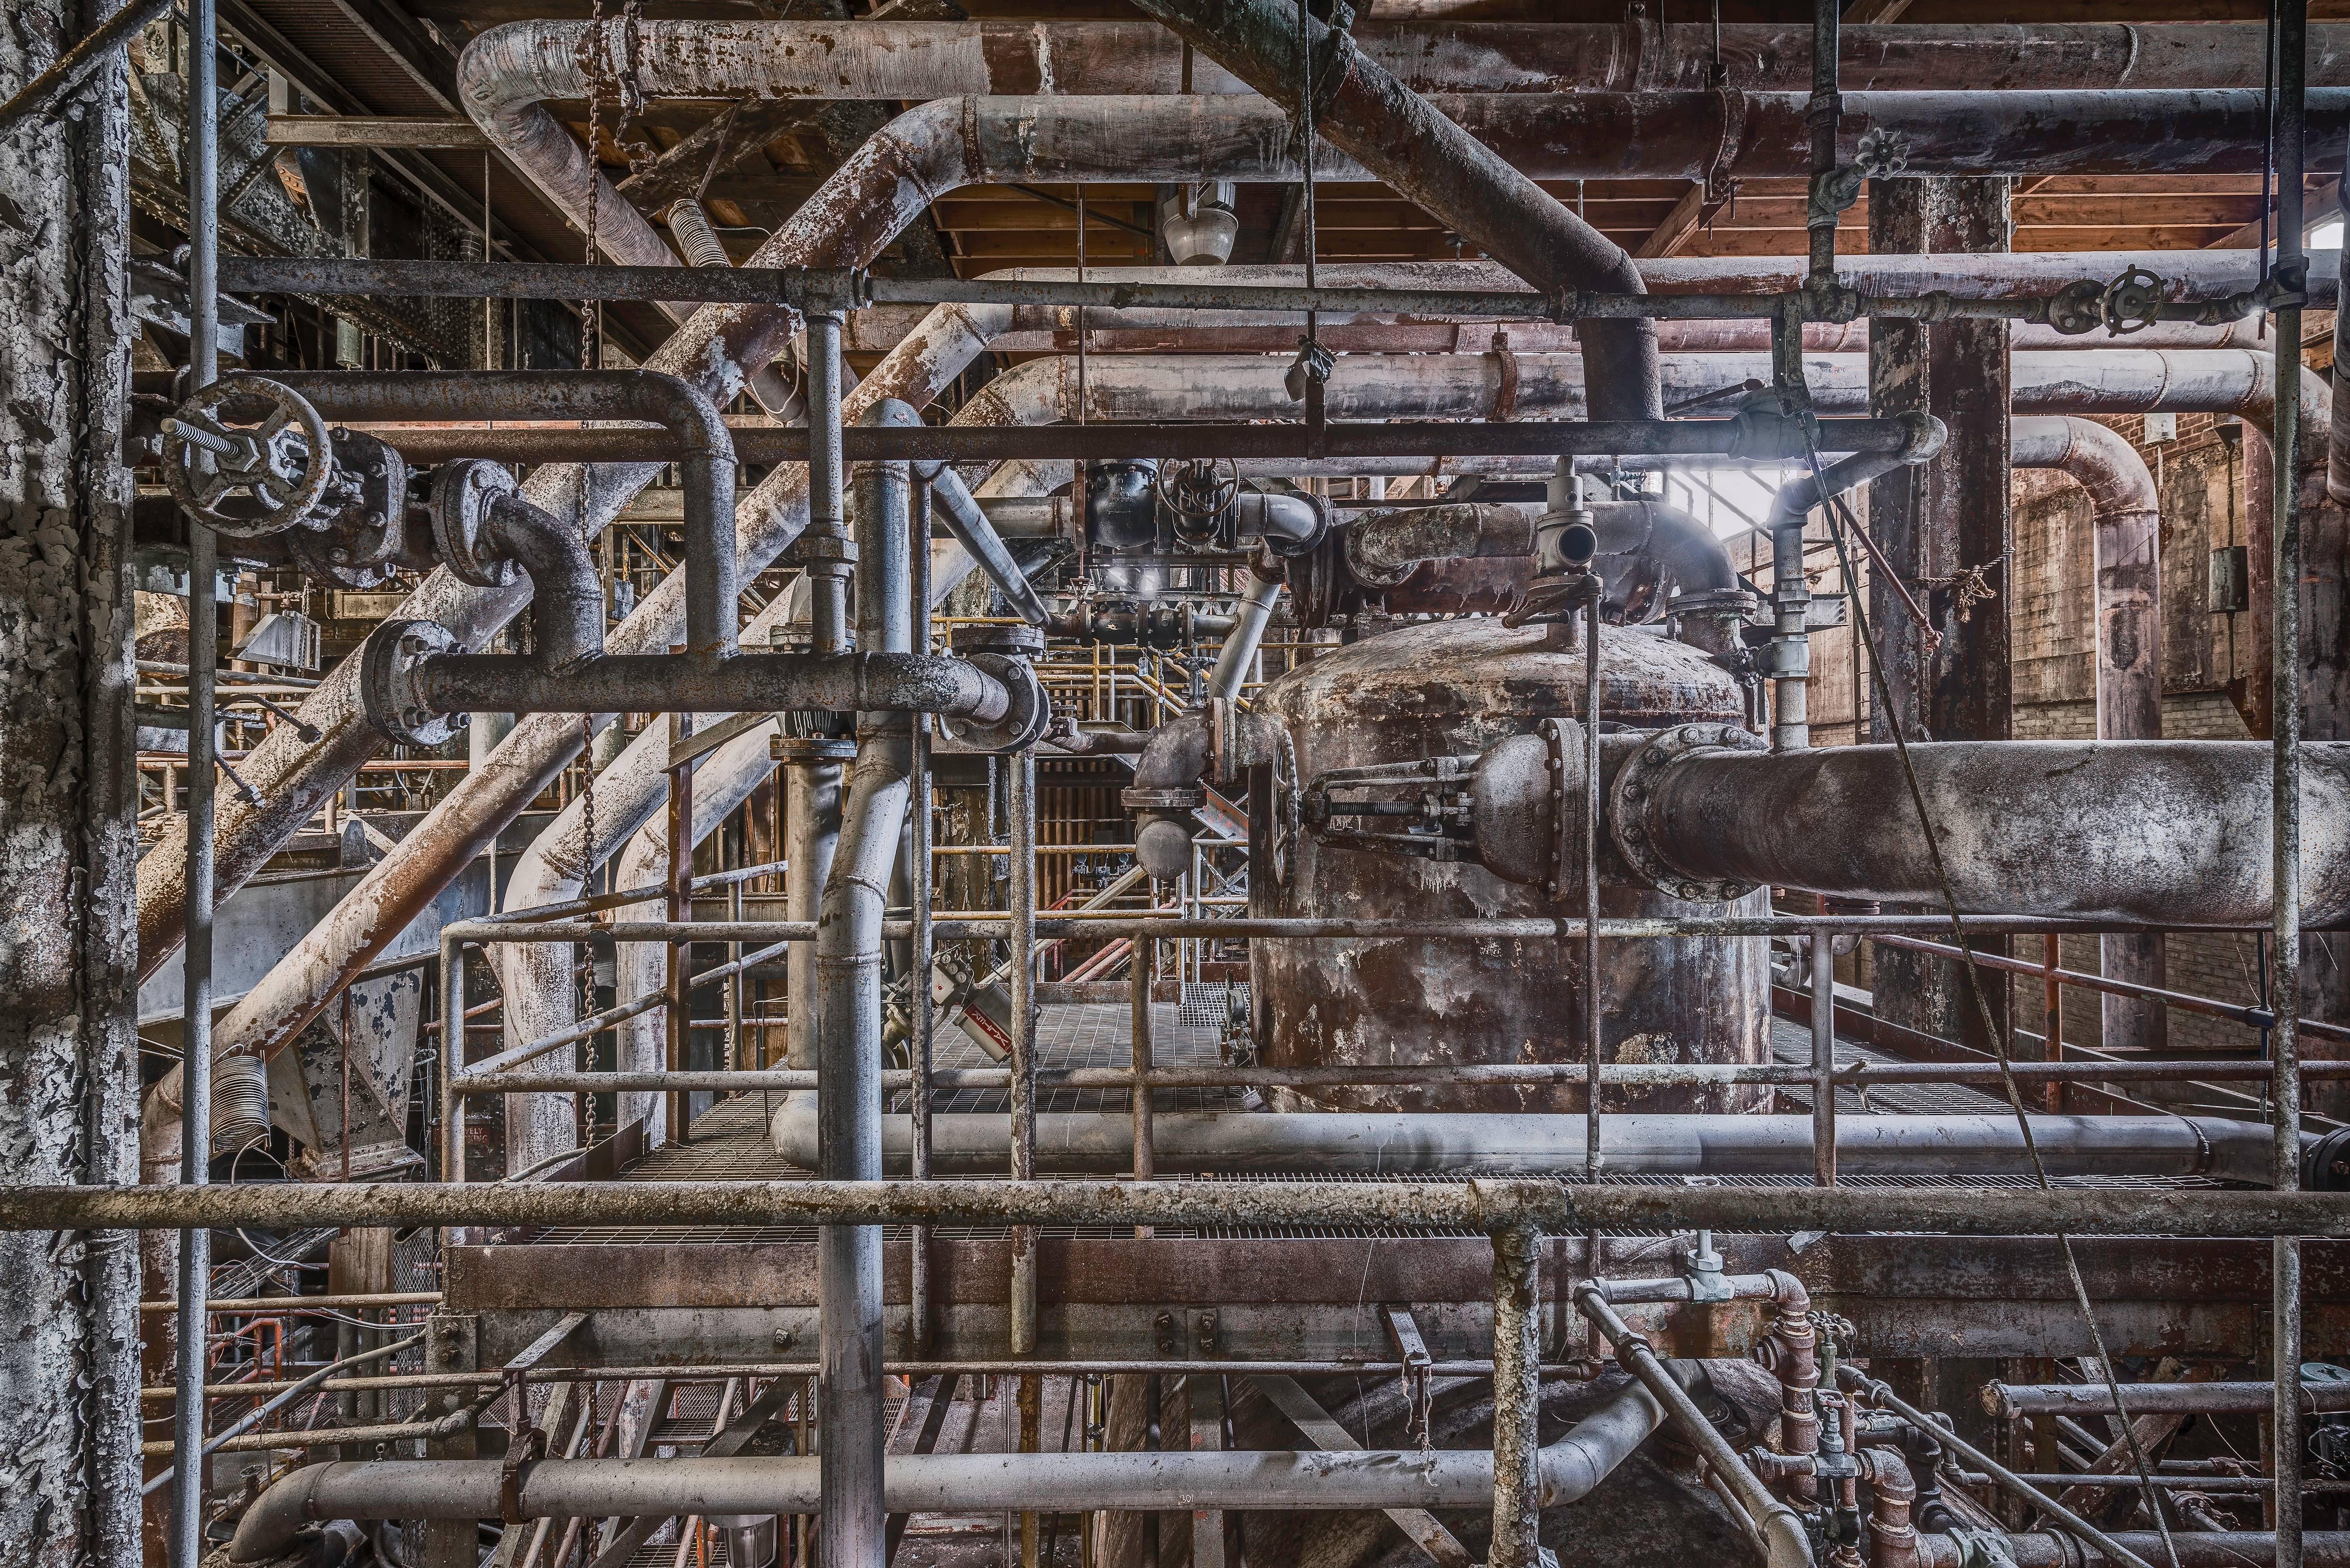 Paul Raphaelson Color Photograph - "Boiler Pipes" (Domino Sugar - Williamsburg, Brooklyn) framed and mounted